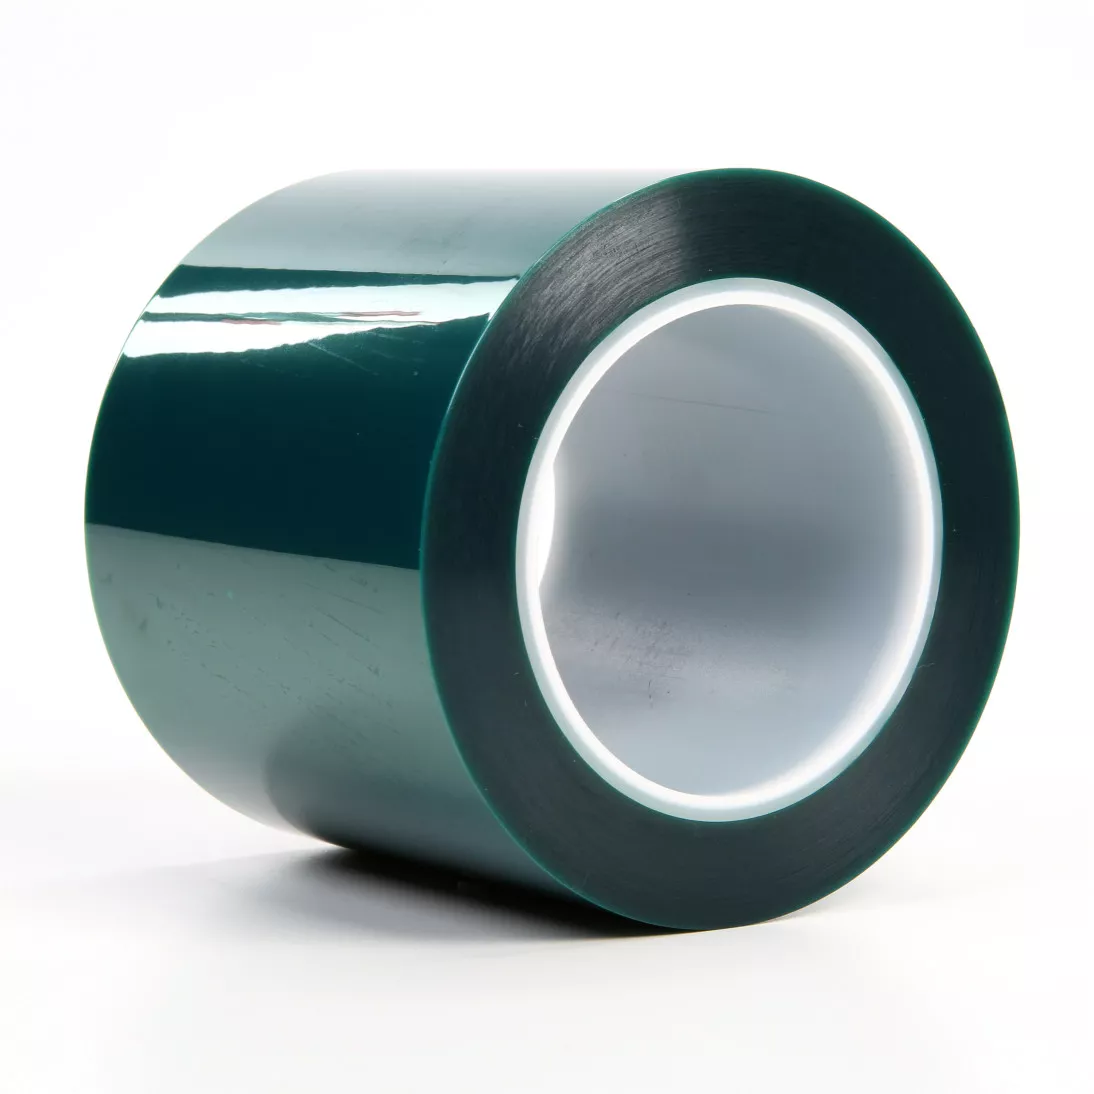 3M™ Polyester Tape 8992, Green, 4 in x 72 yd, 3.2 mil, 8 rolls per case